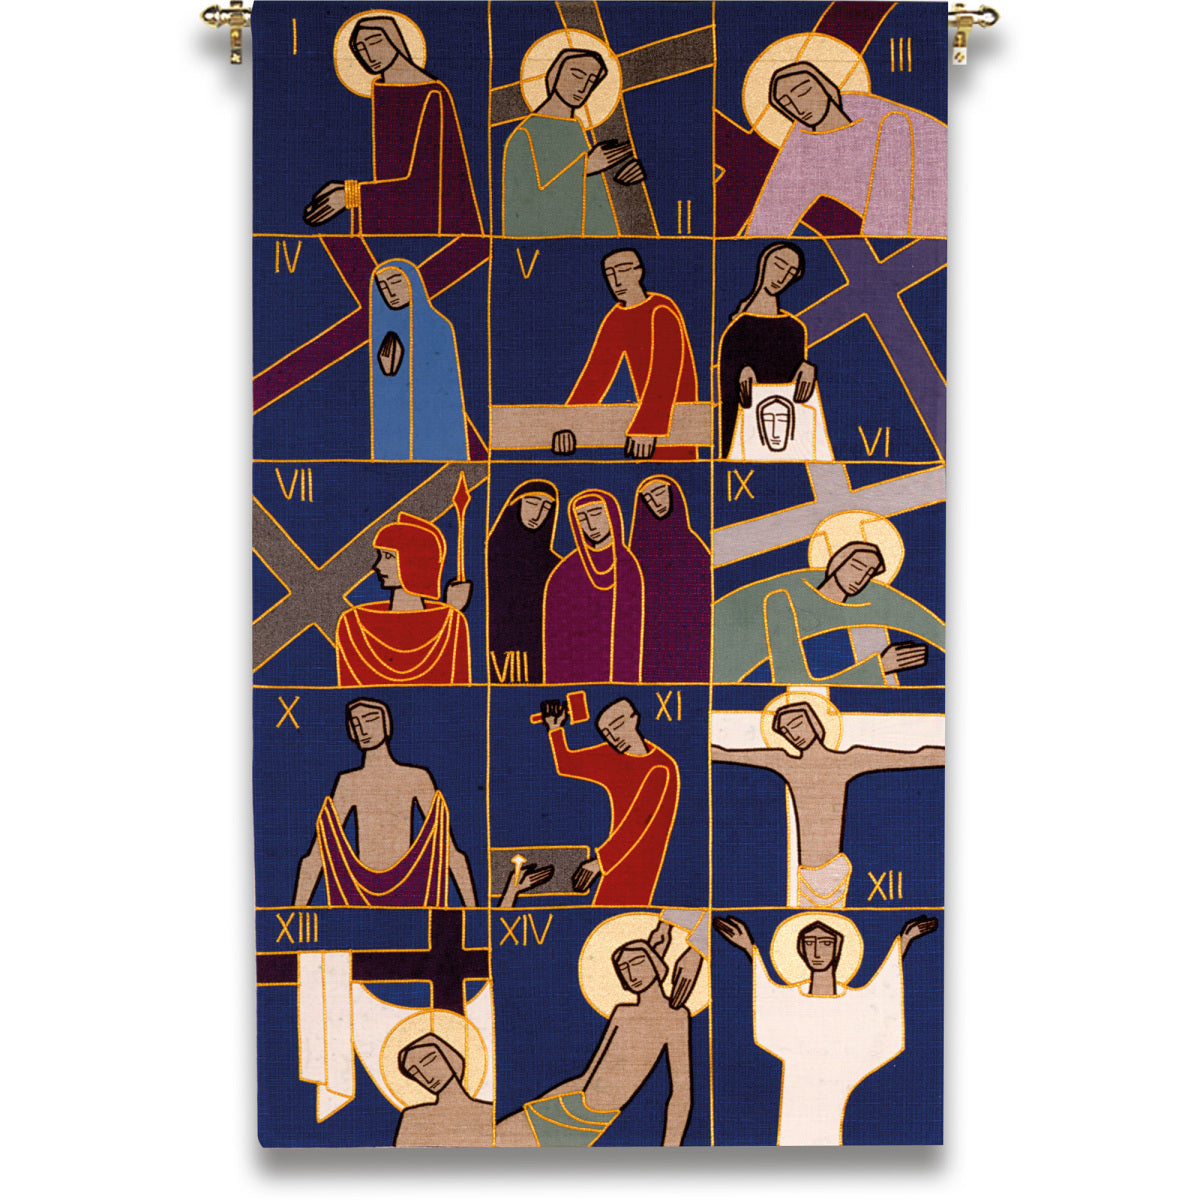 Stations of the Cross Tapestry